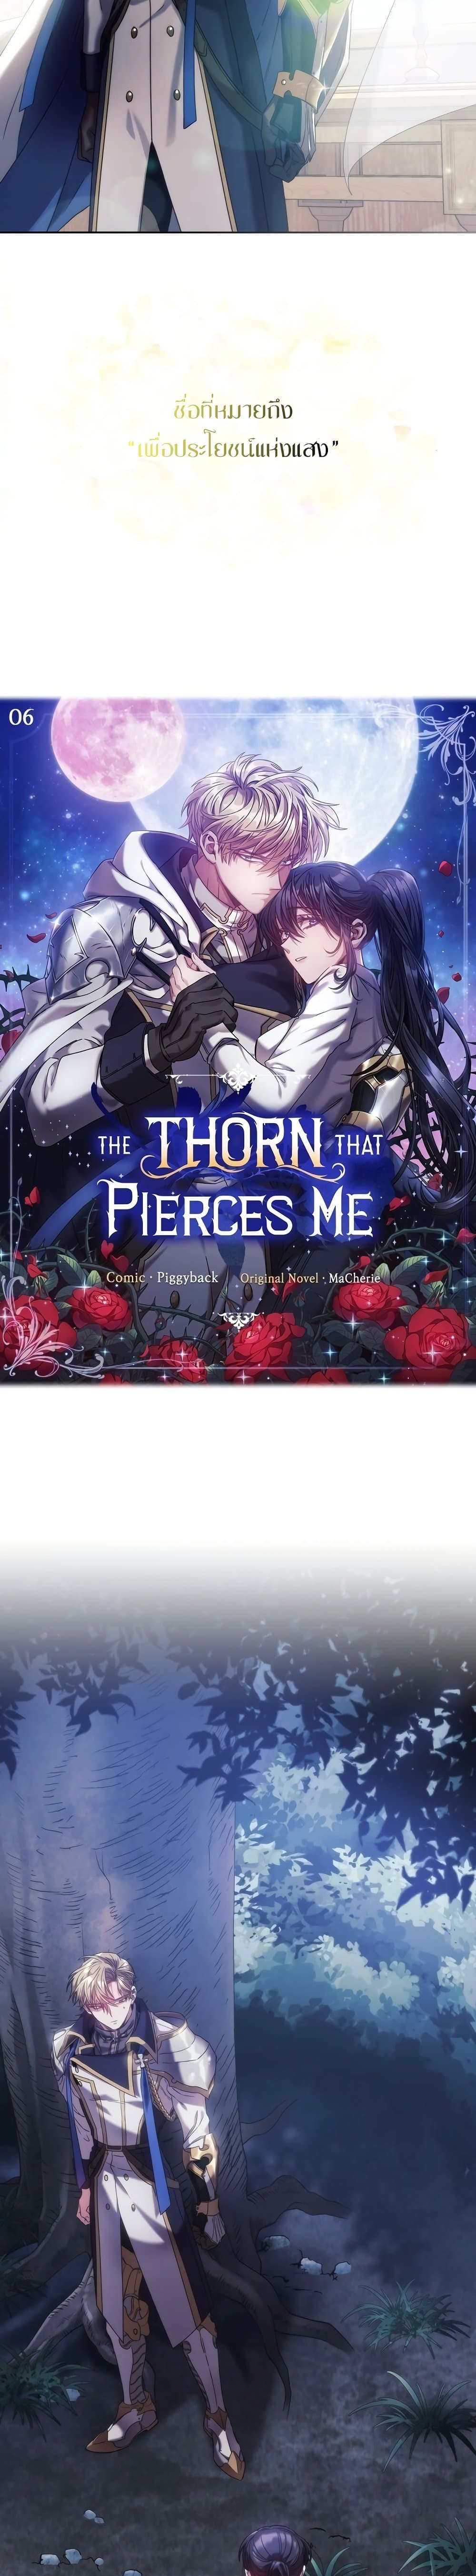 The Thorn That Pierces Me 6-6